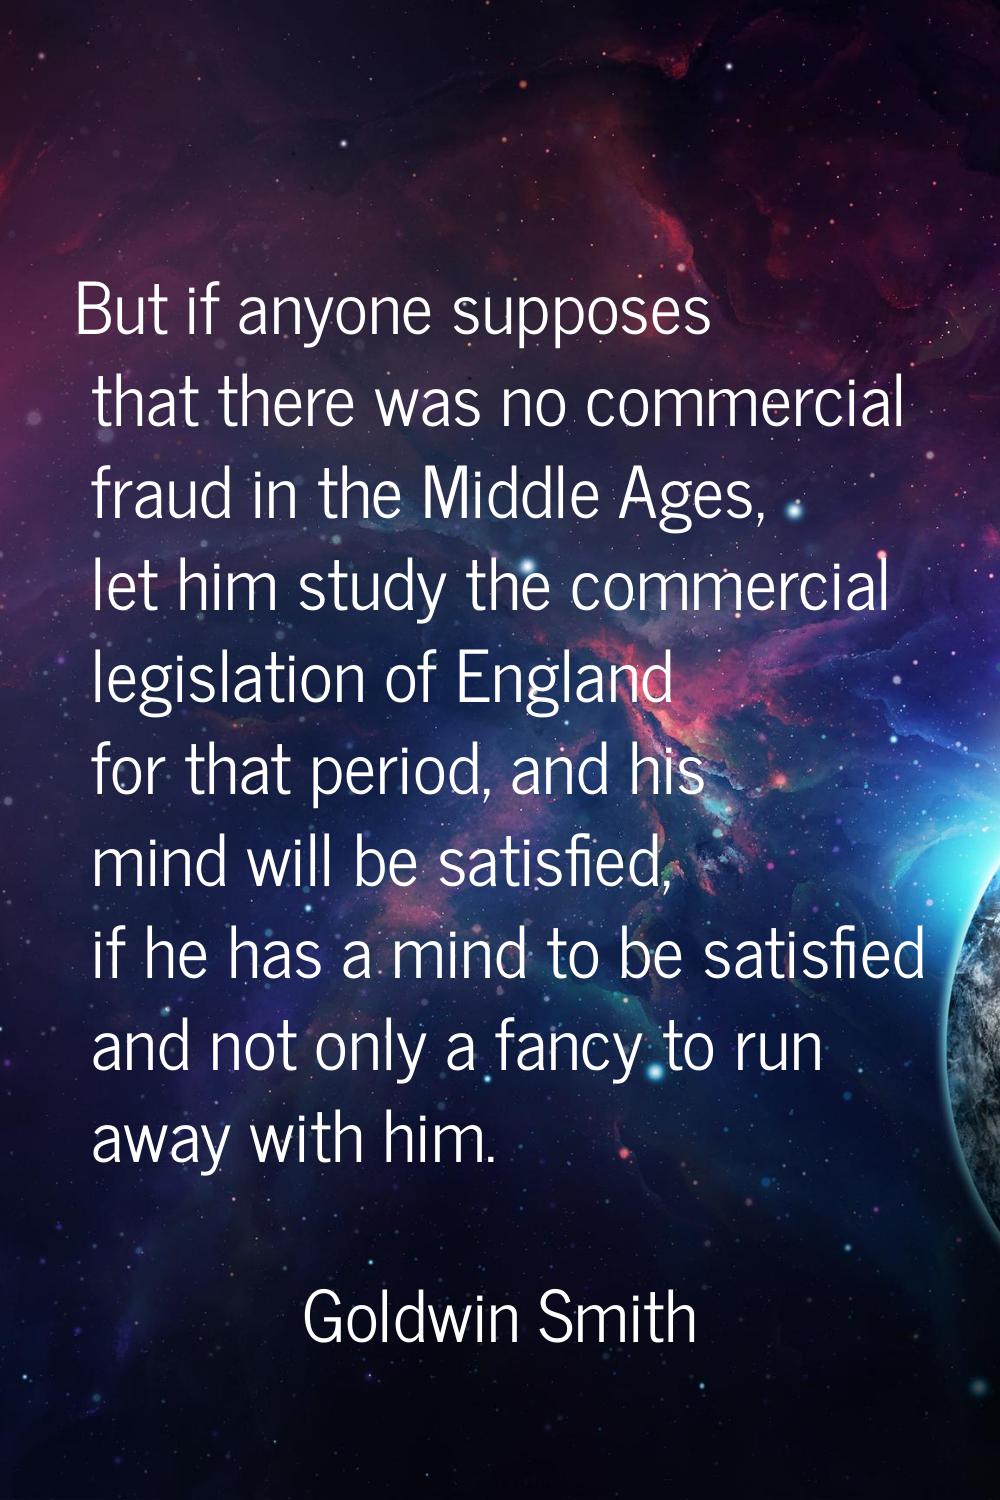 But if anyone supposes that there was no commercial fraud in the Middle Ages, let him study the com